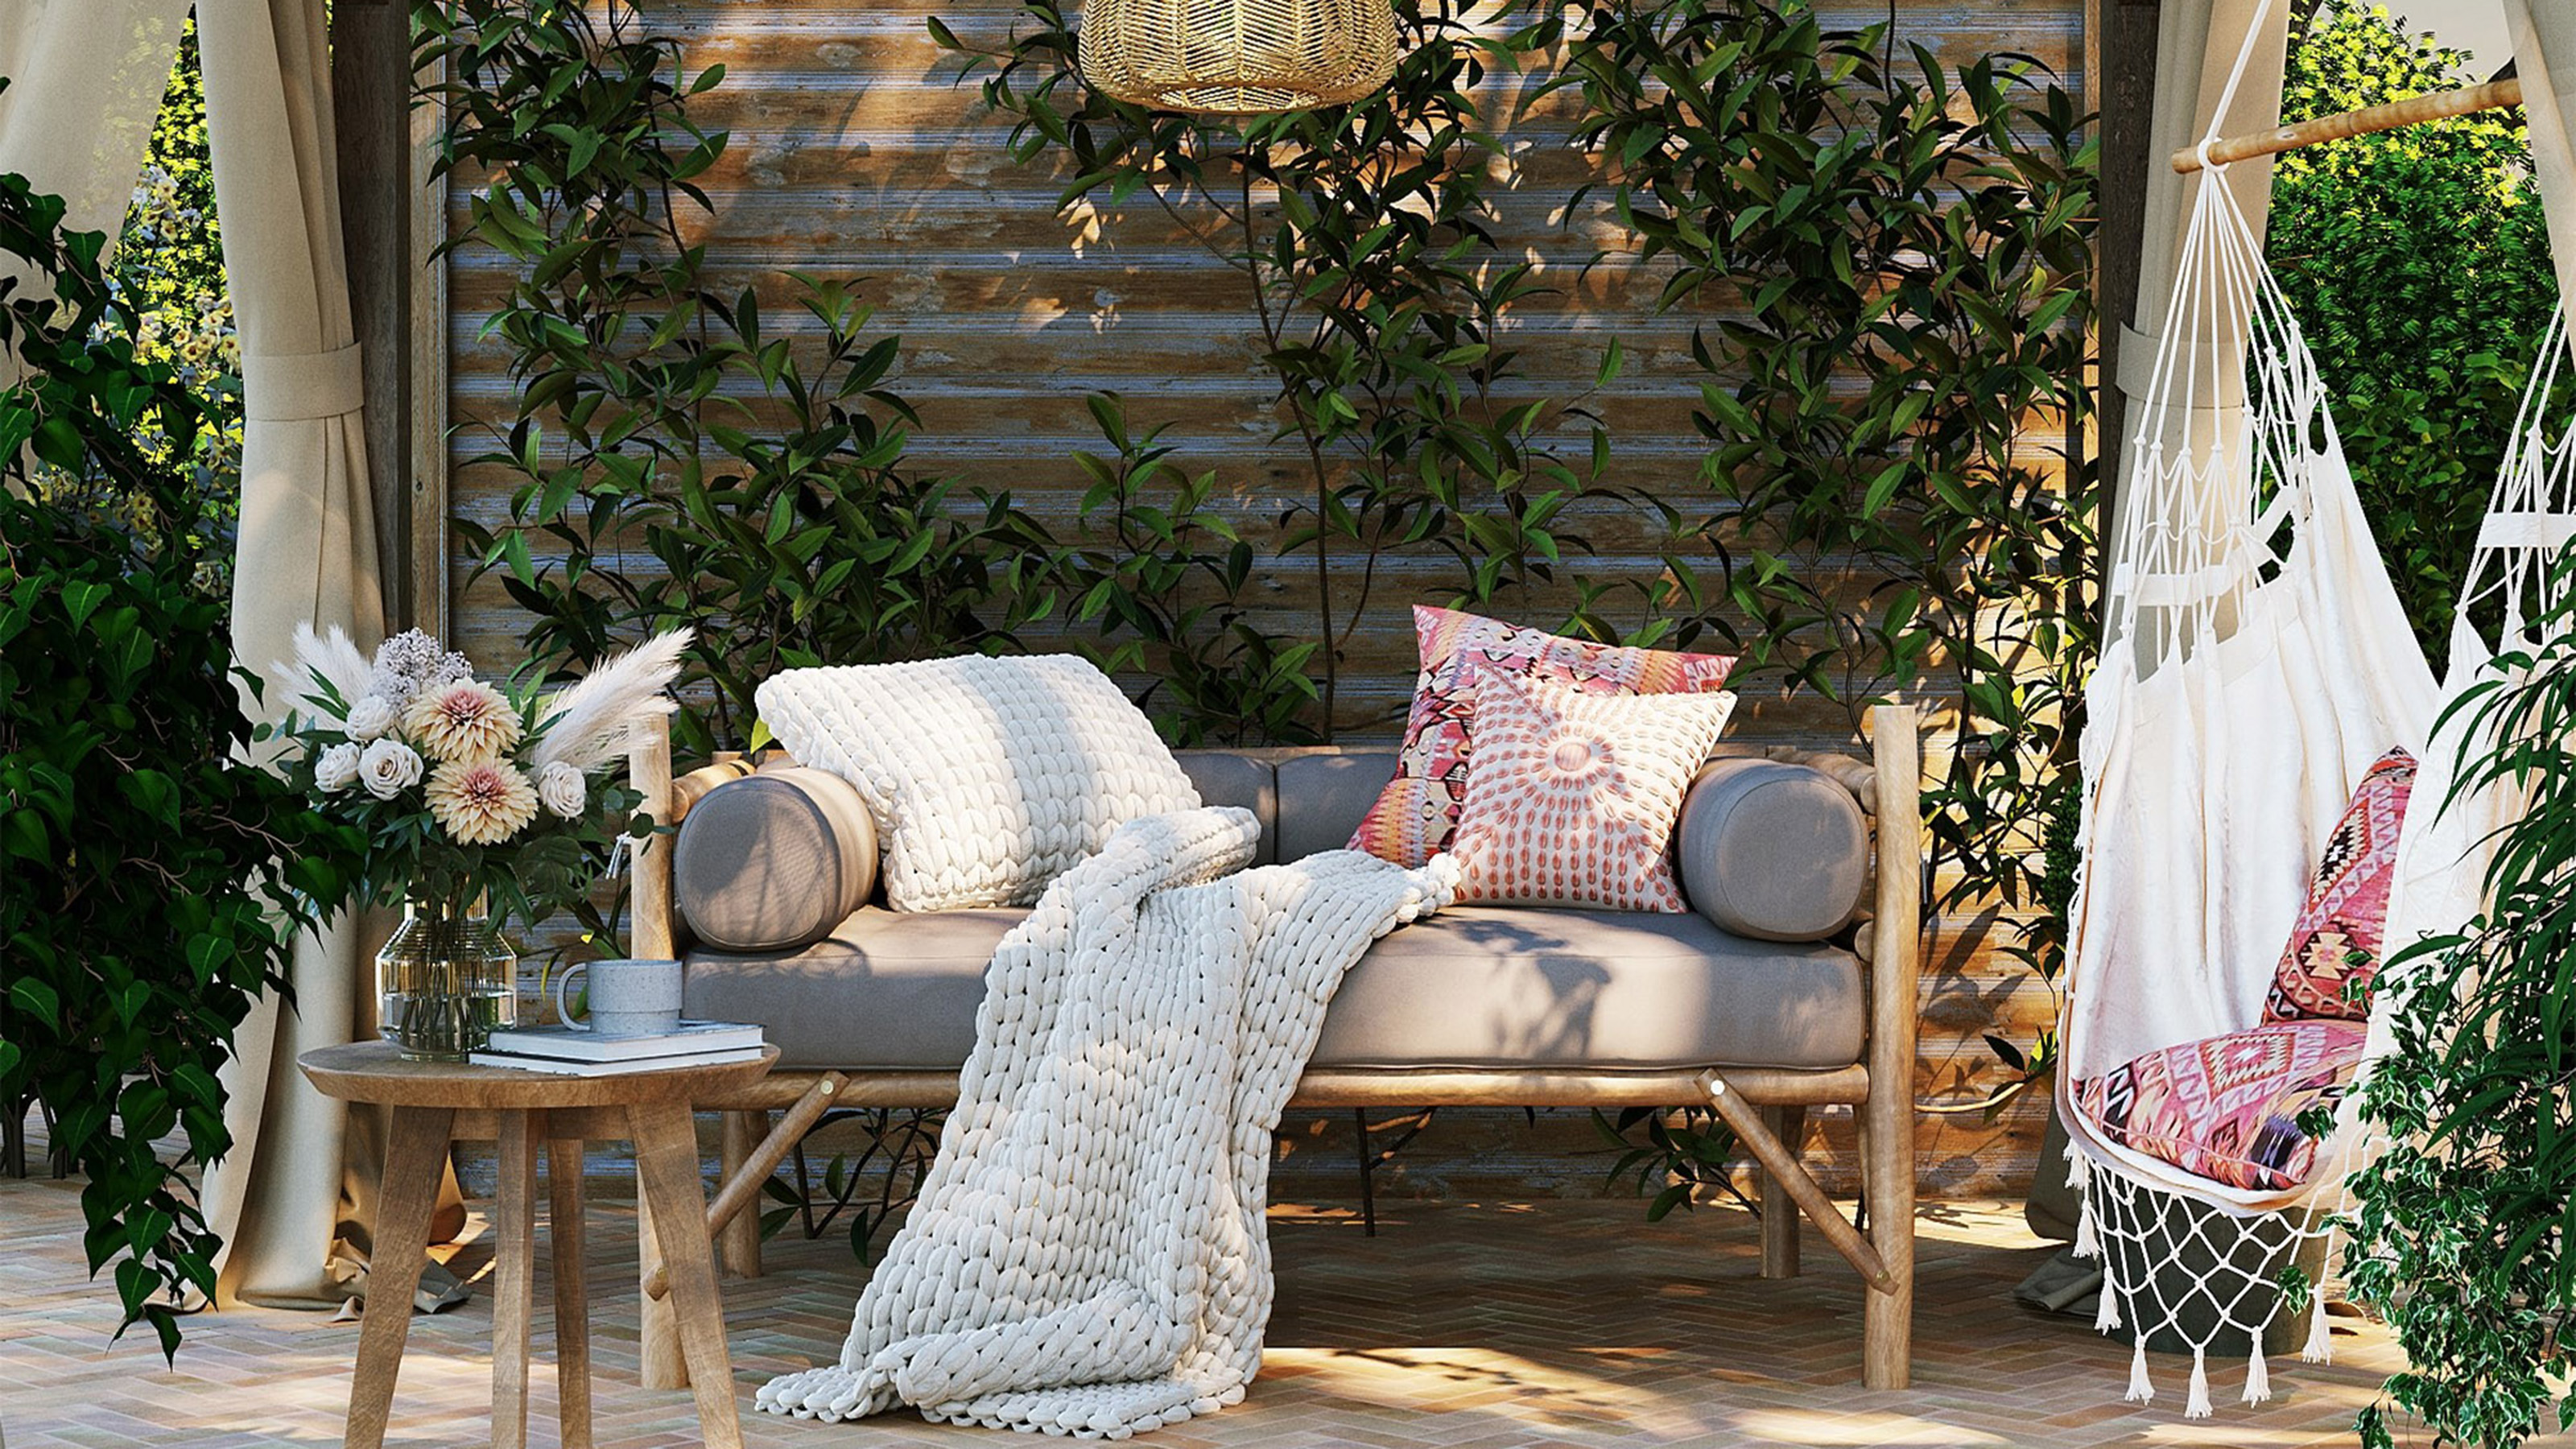 Best Patio Decorating Tips From Design Experts